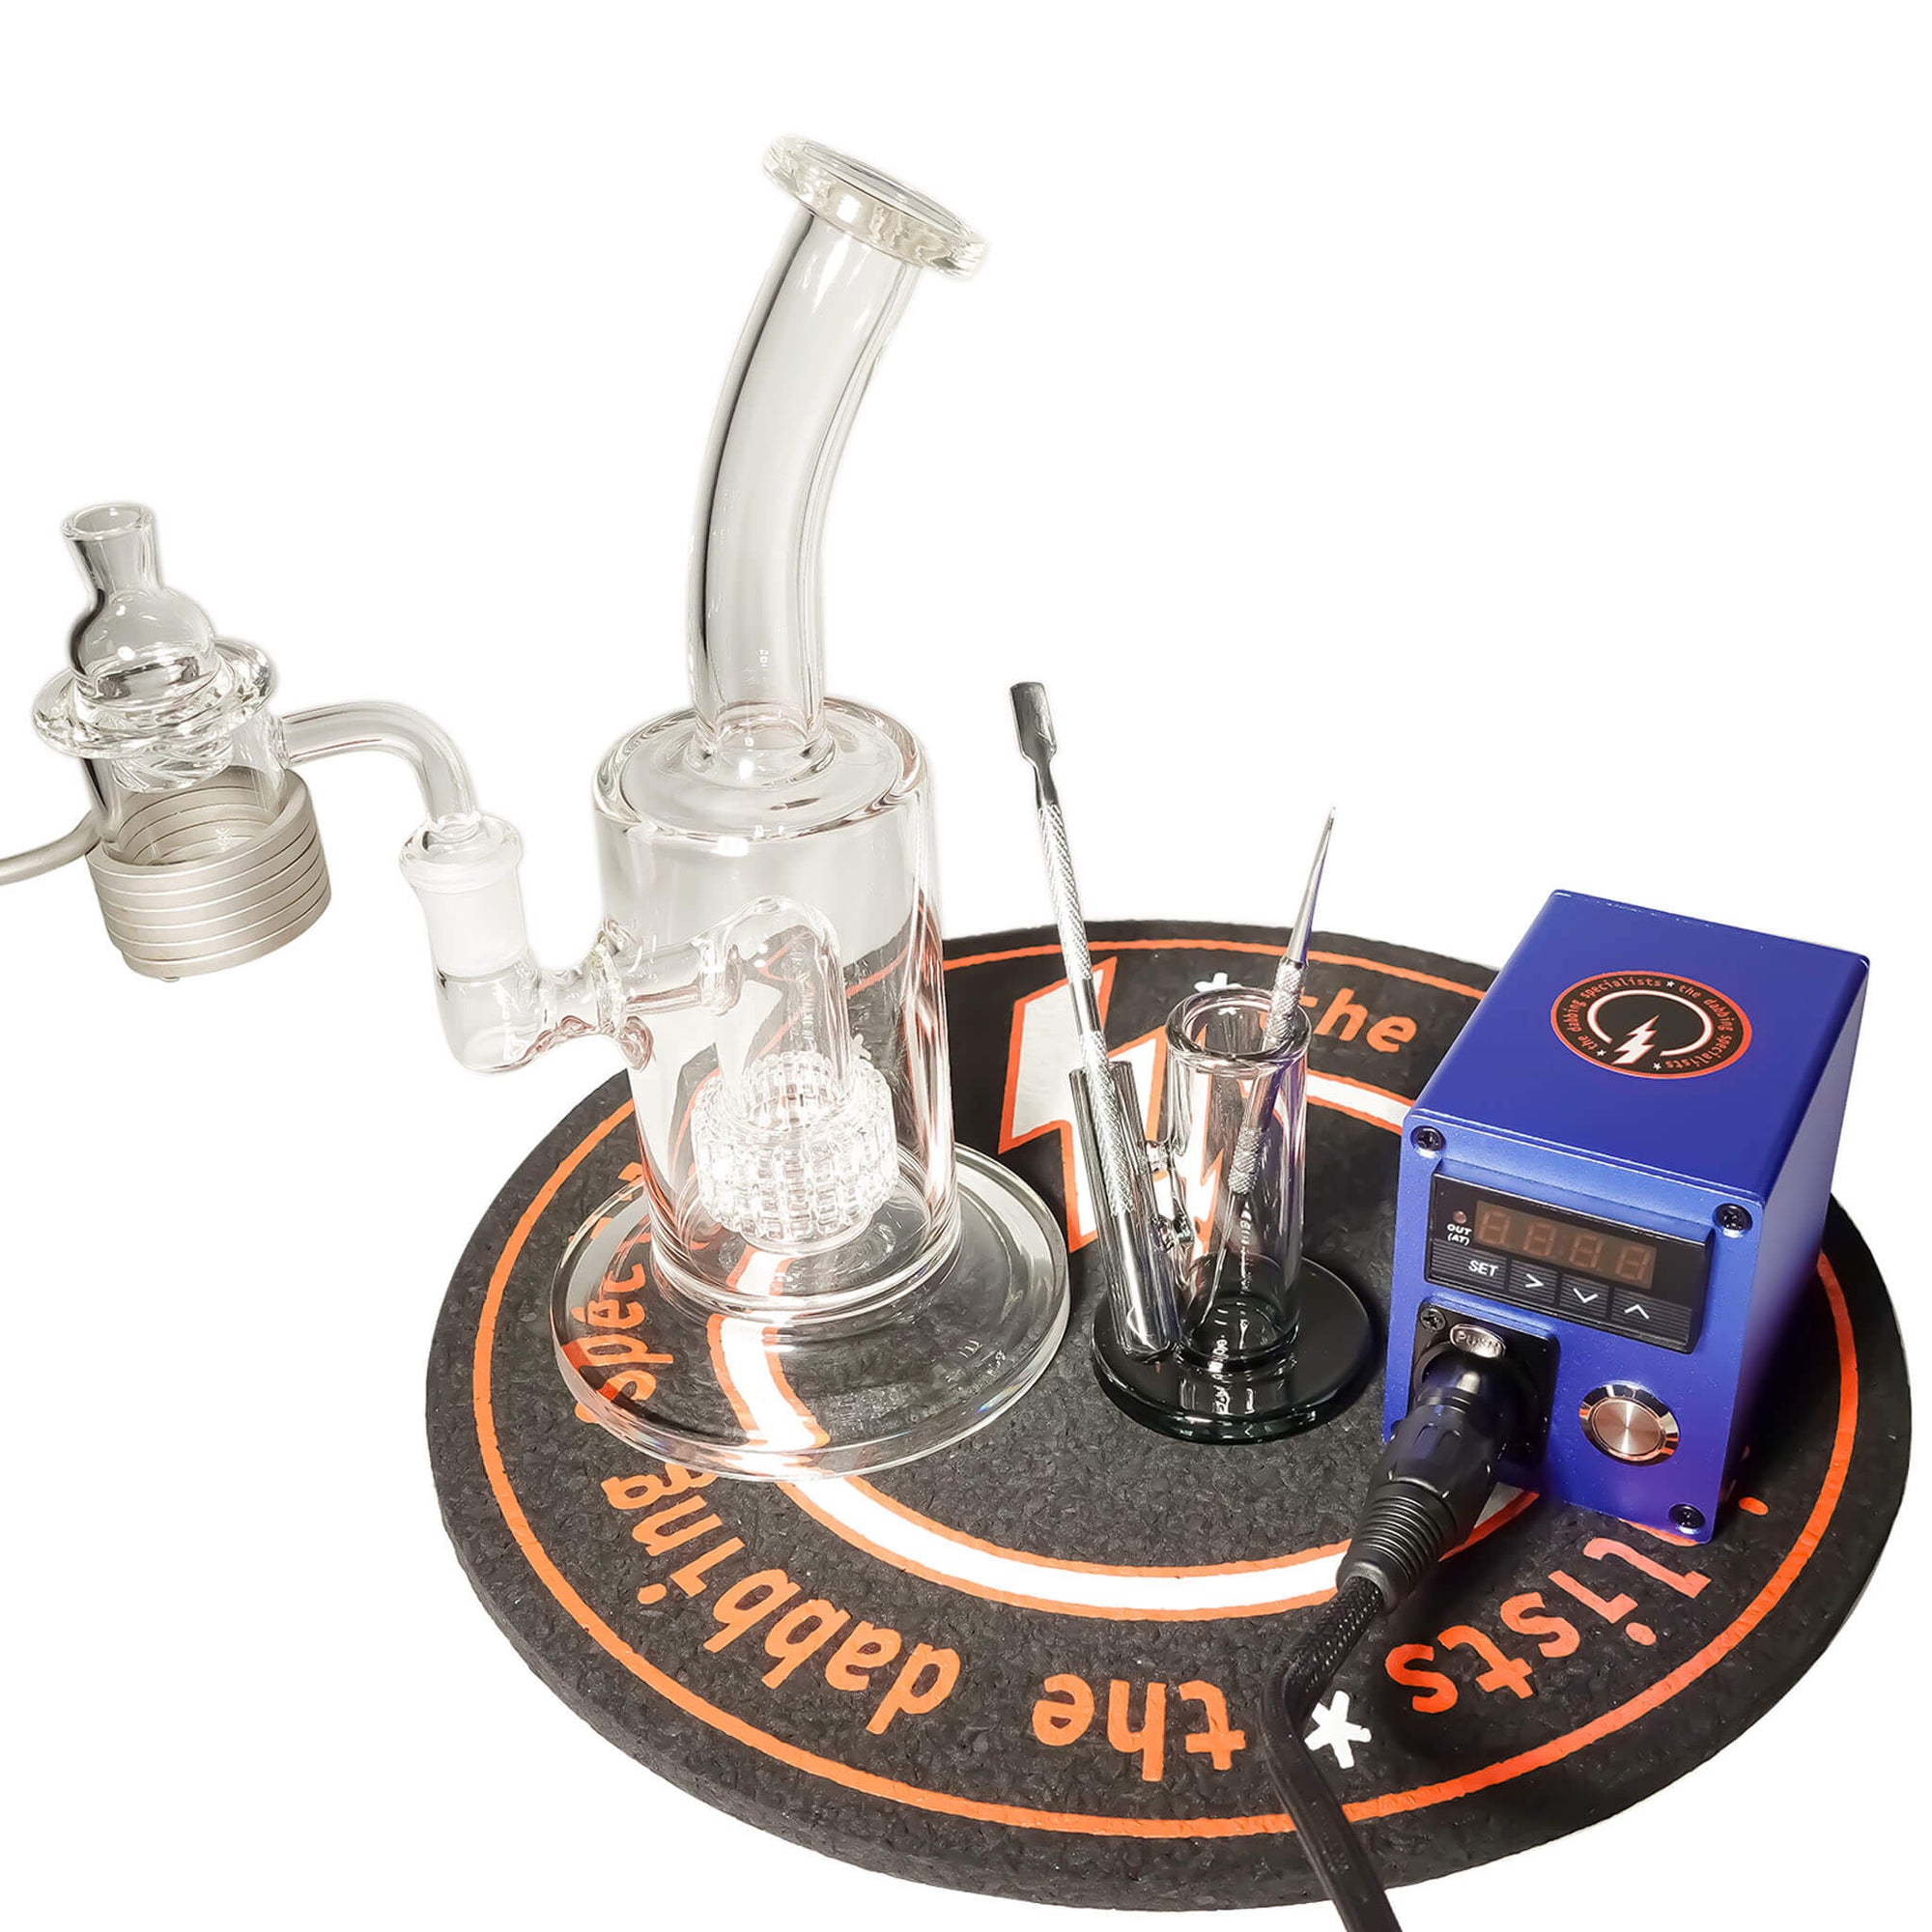 Commander 30mm E-Banger Deluxe Enail Kit | Red Kit View | the dabbing specialists